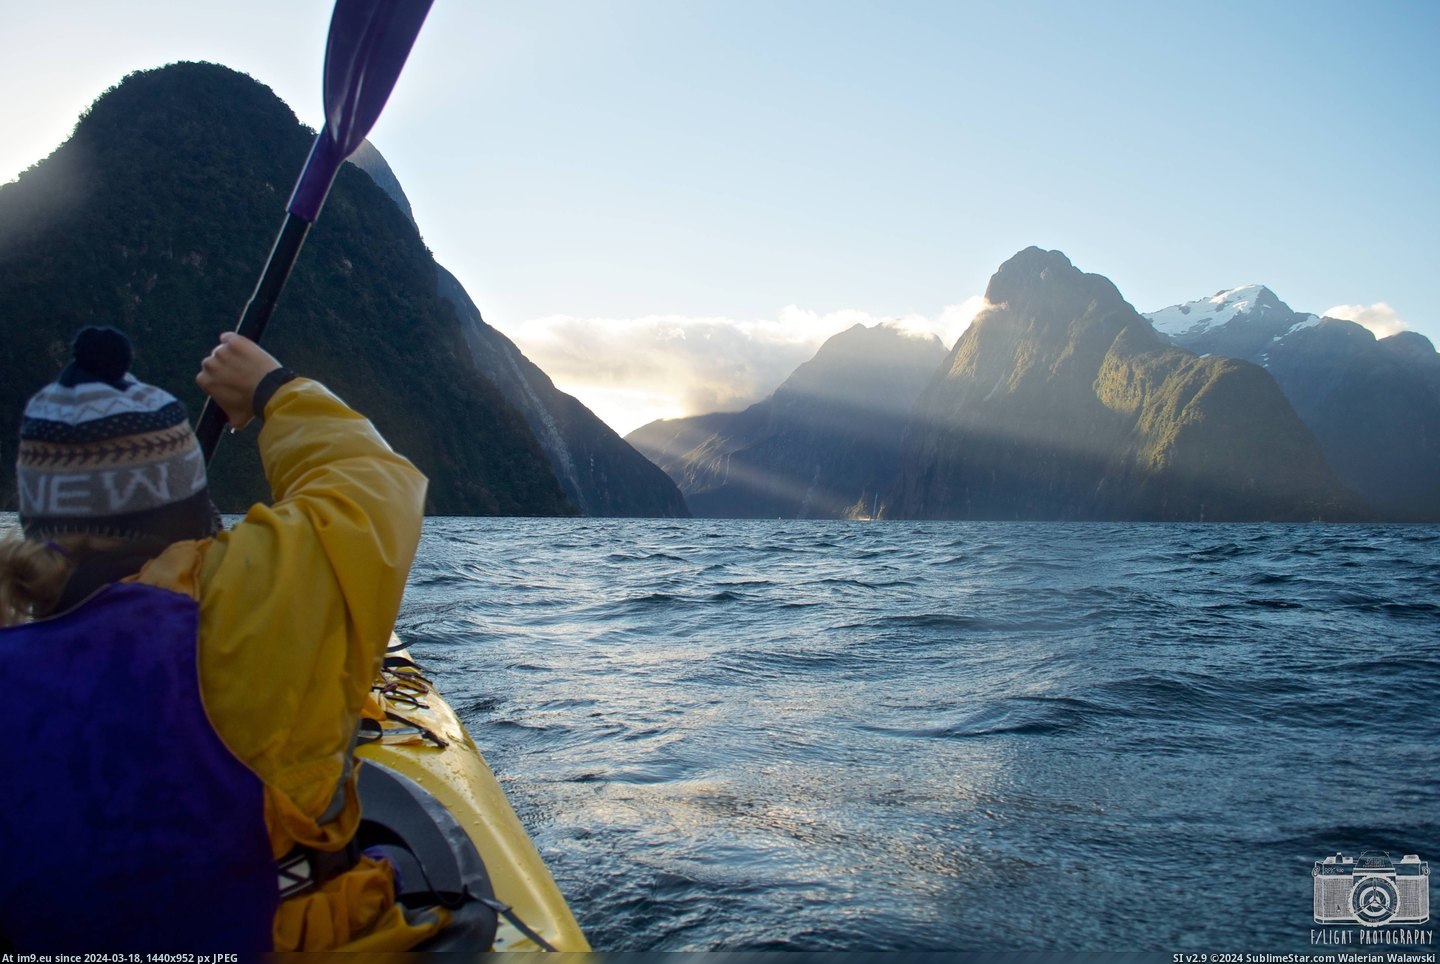 #Park #National #Zealand #Milford #Kayaking #Sound #4288x2848 #Fiordland [Earthporn] Kayaking the Milford Sound, Fiordland National Park, New Zealand [4288x2848] [OC] Pic. (Bild von album My r/EARTHPORN favs))